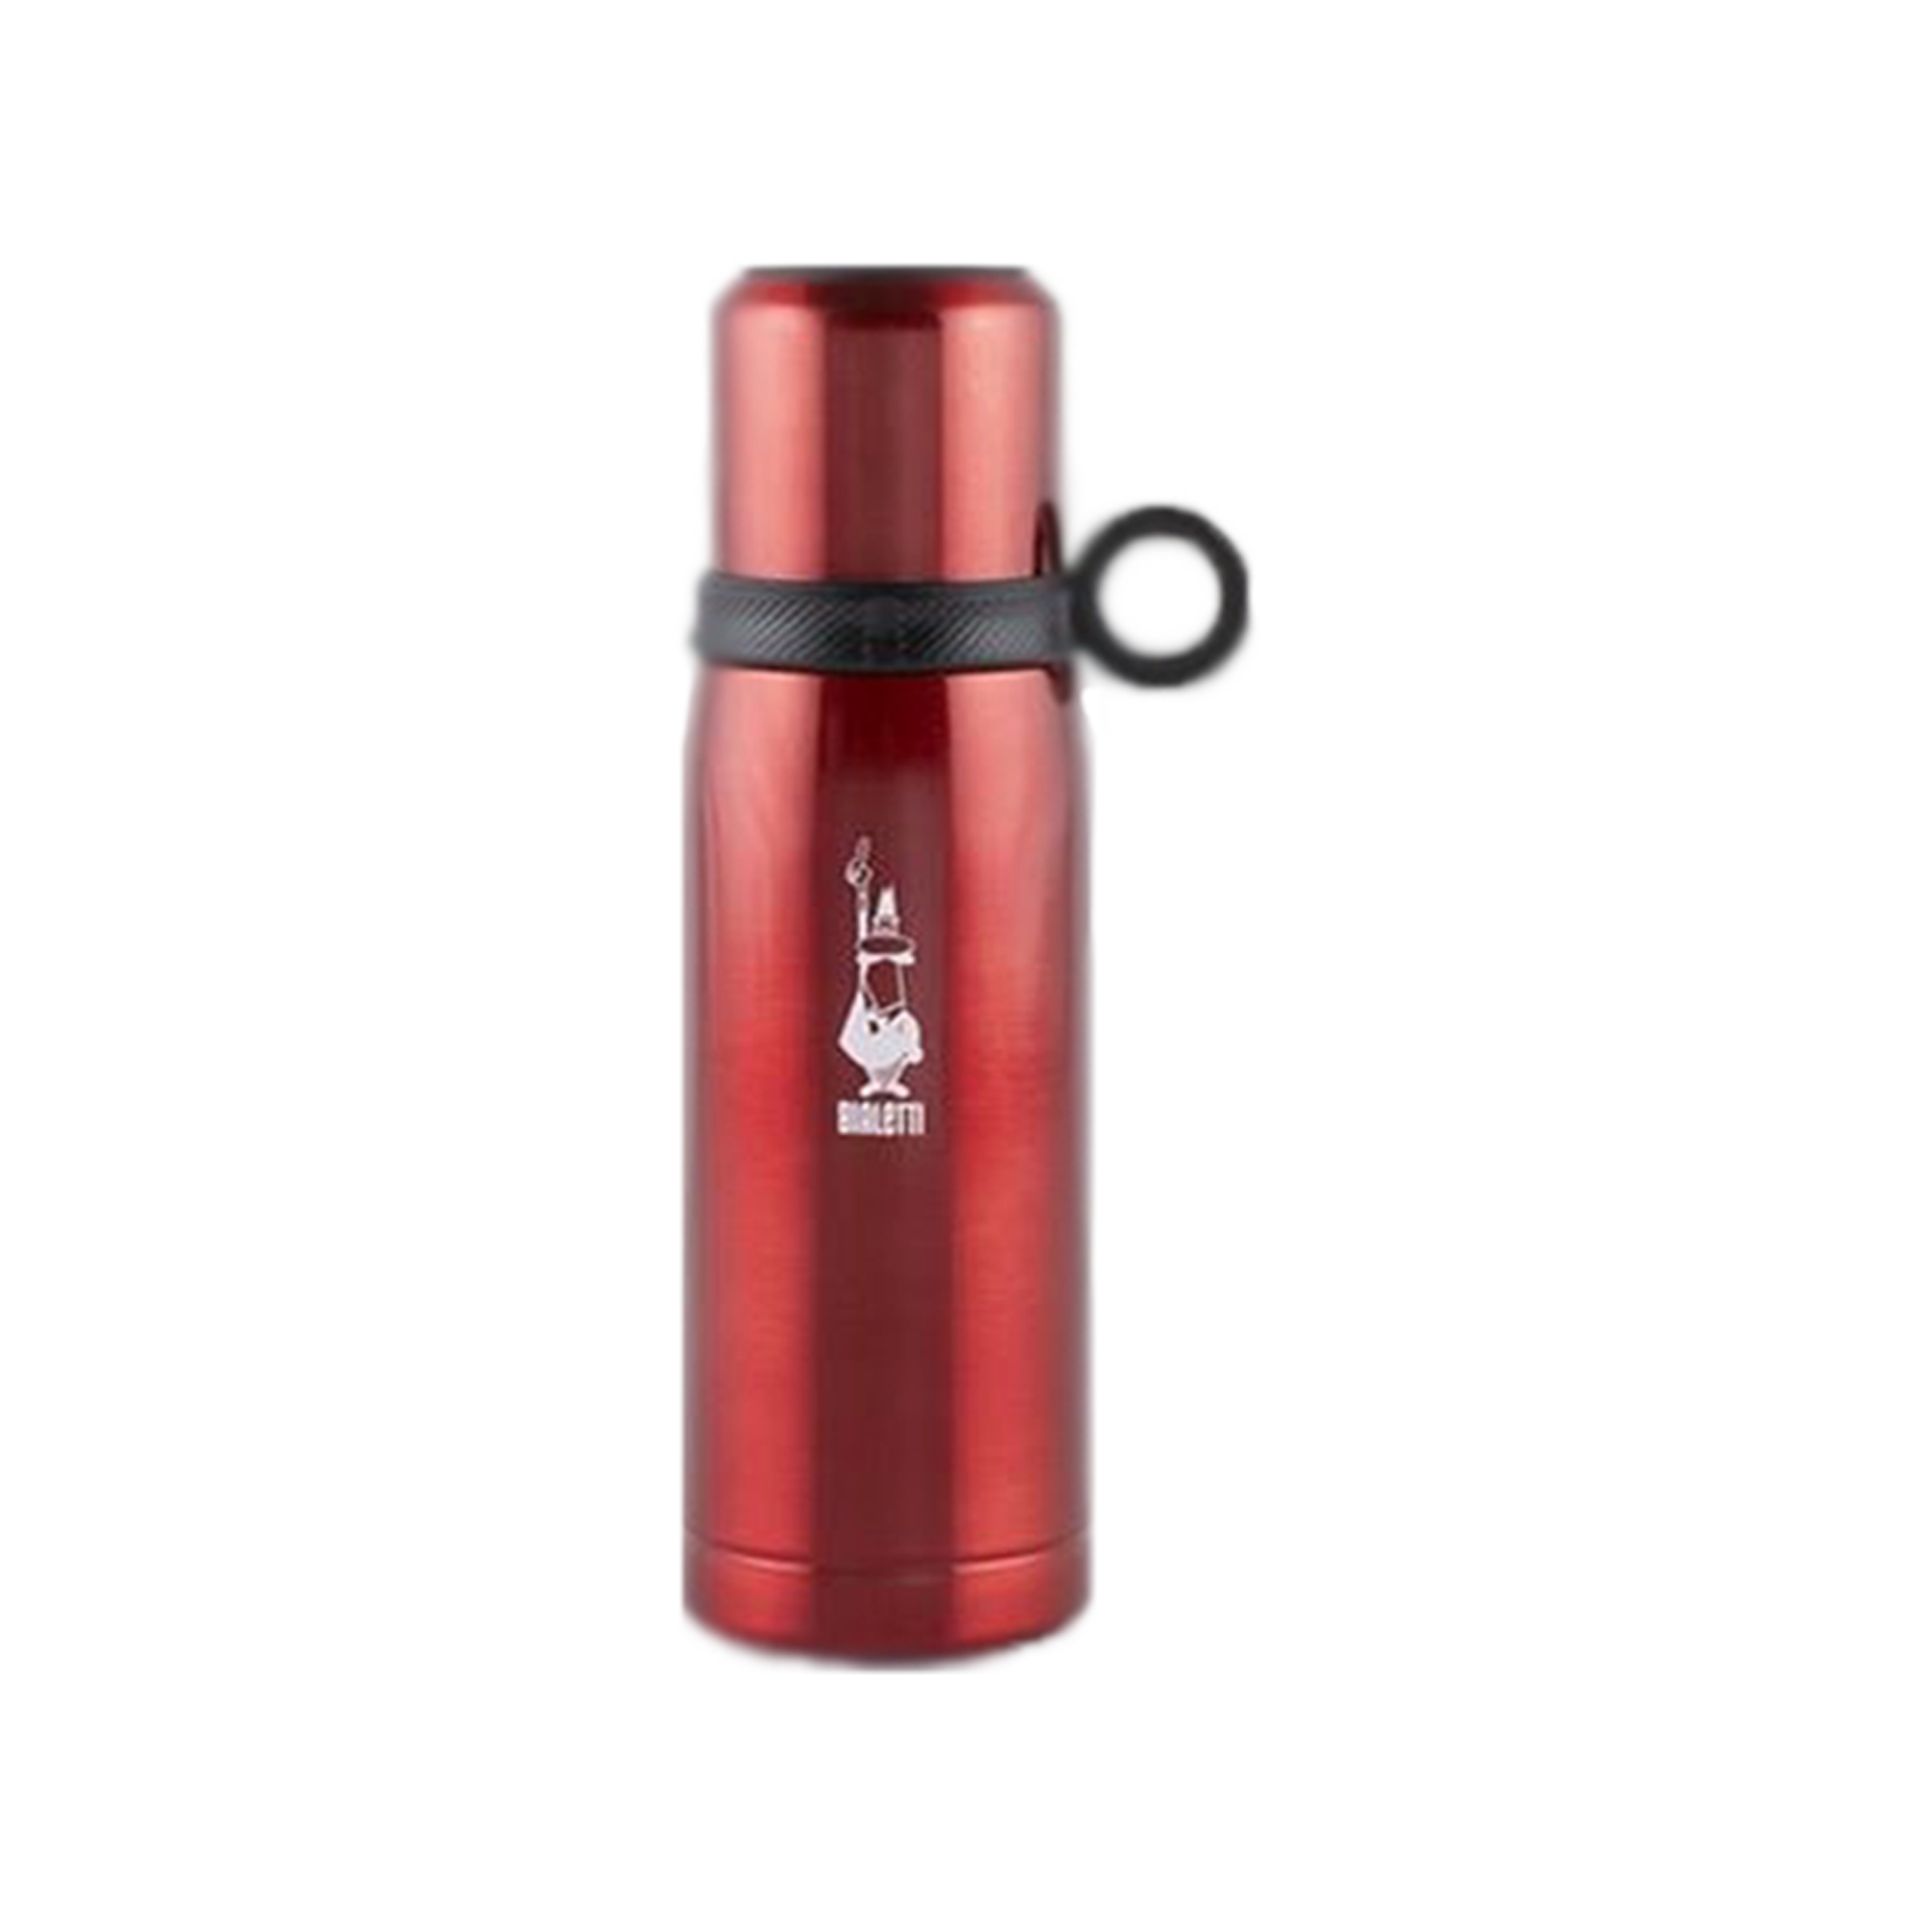 Coffee Thermos With Temperature Display 450ml Keep Warm And Cold